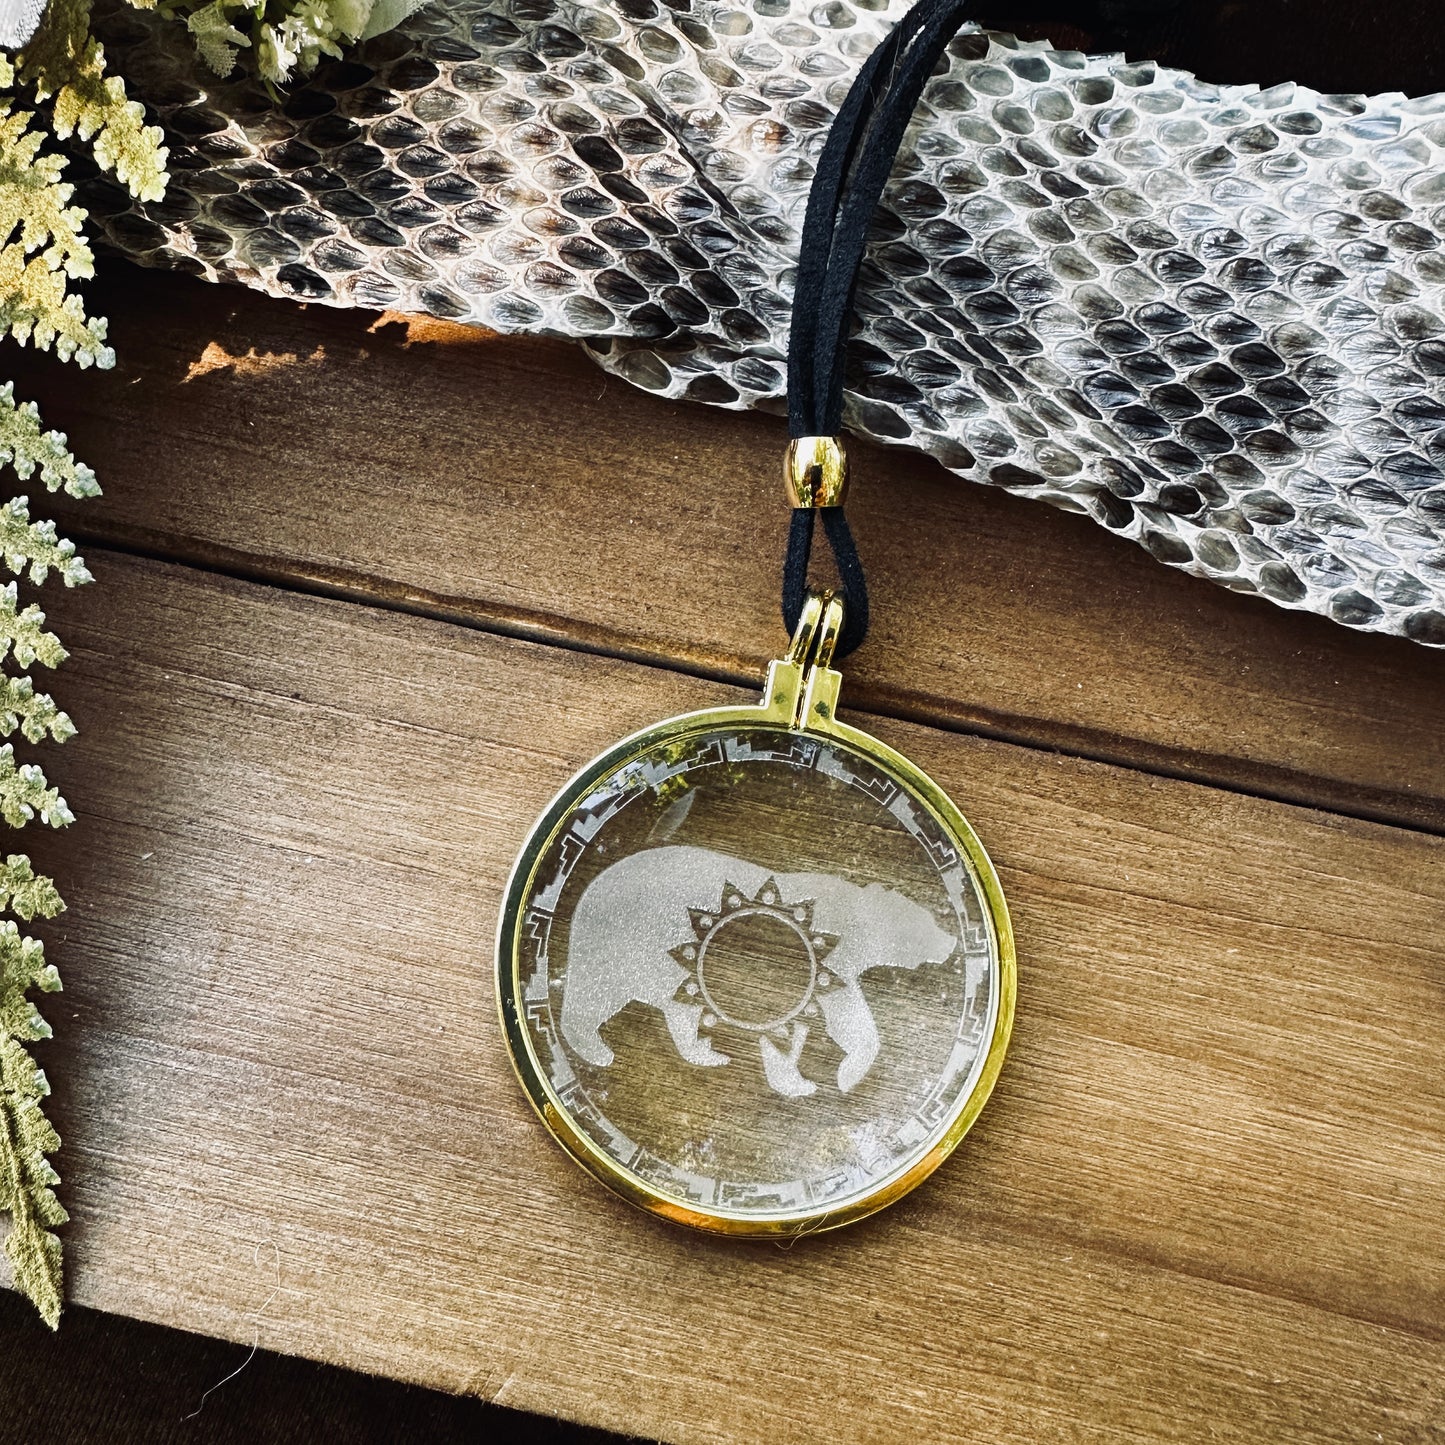 Bear Necklace, Solar Lighter, Magnifying Glass Necklace, Sustainable Jewelry, Cannabis Accessory